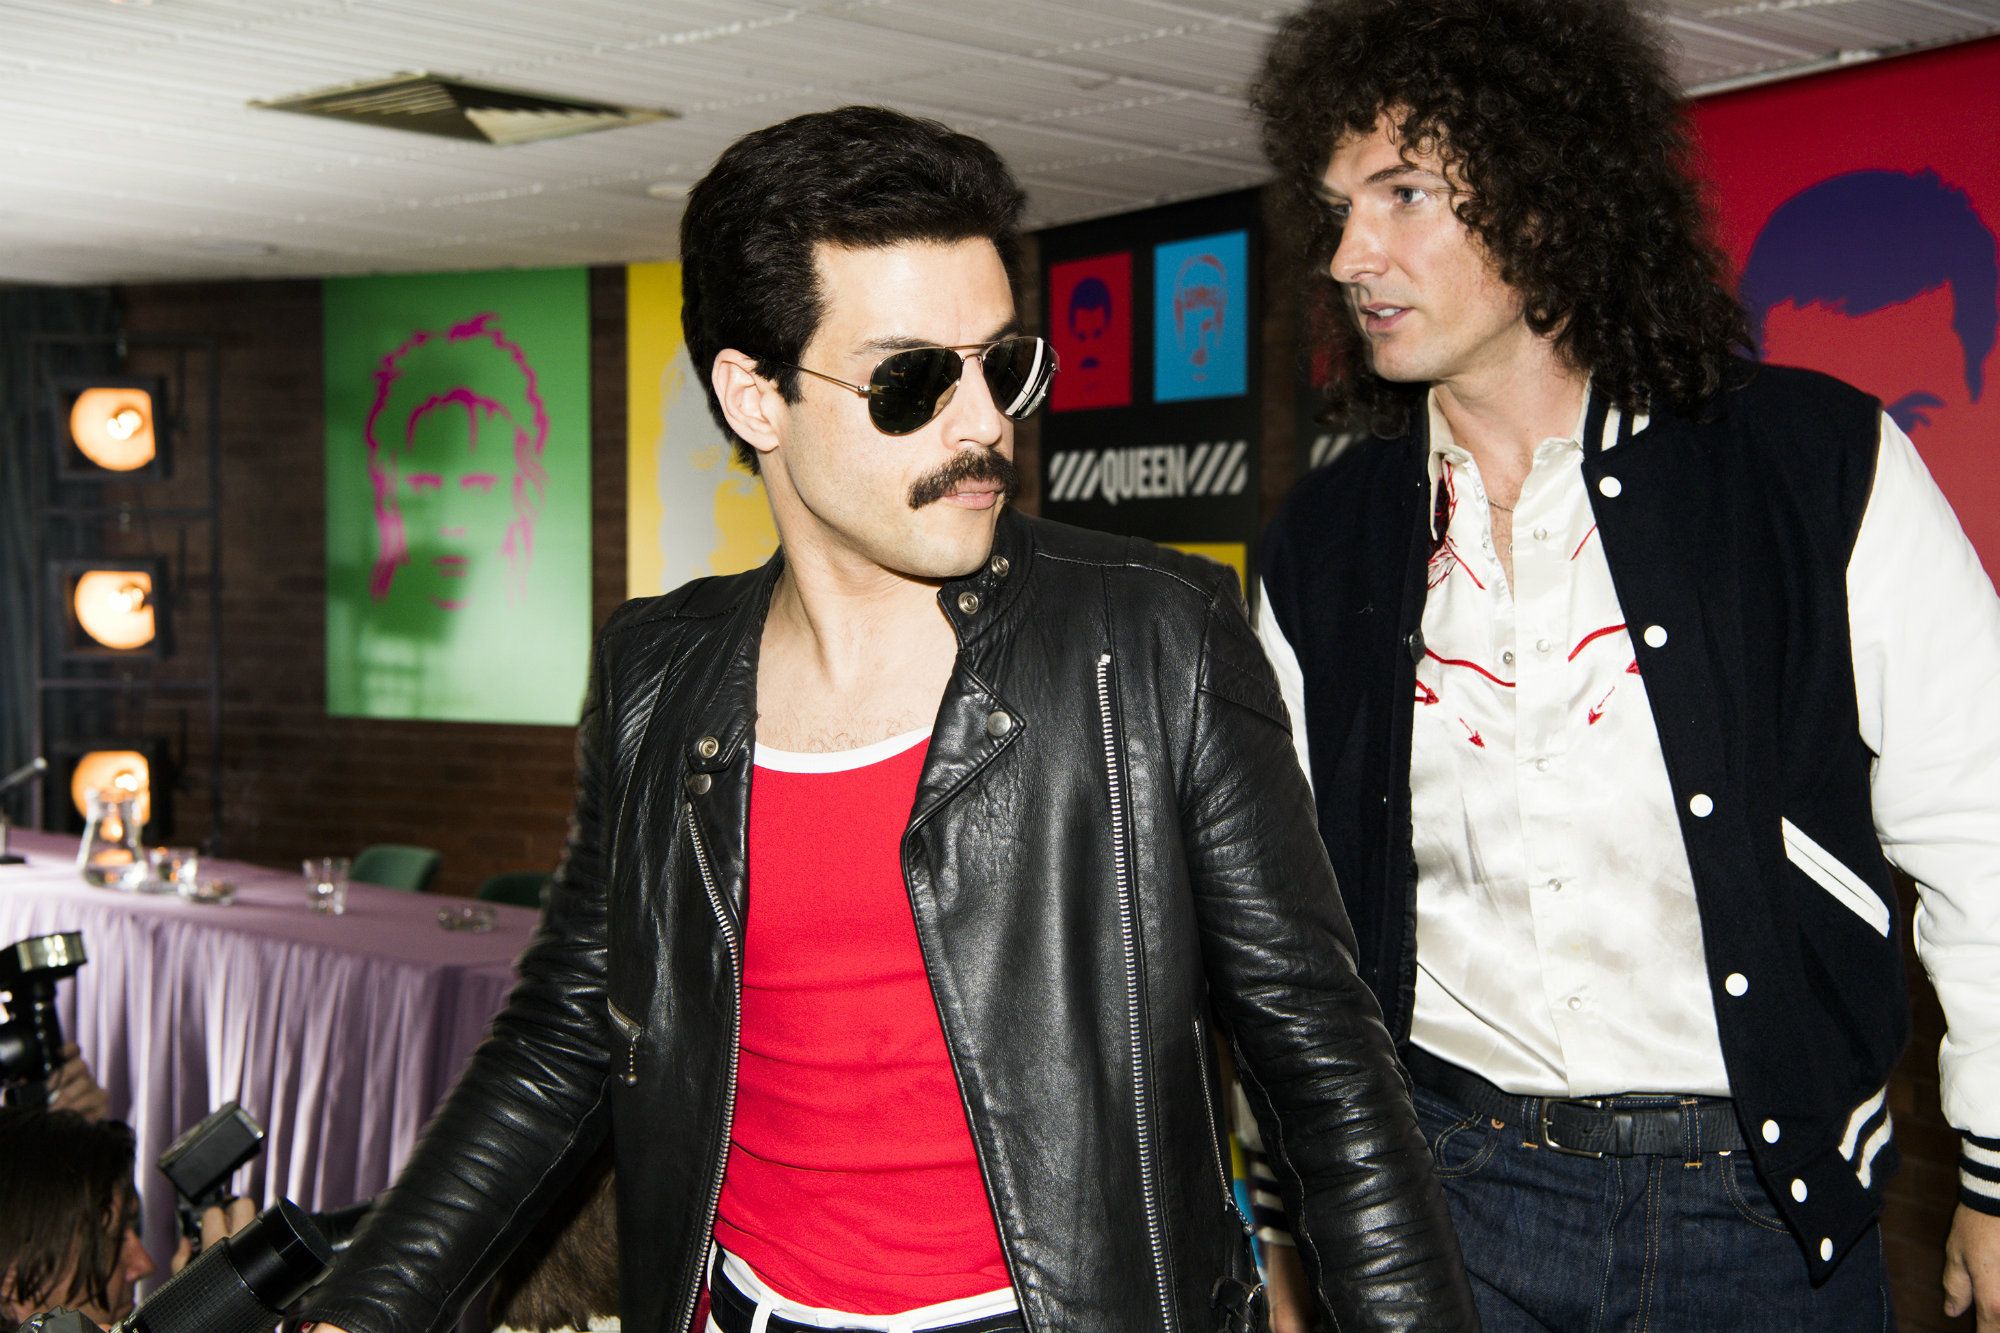 Bohemian Rhapsody Trailer Screens At CinemaCon; Images Reveal Queen